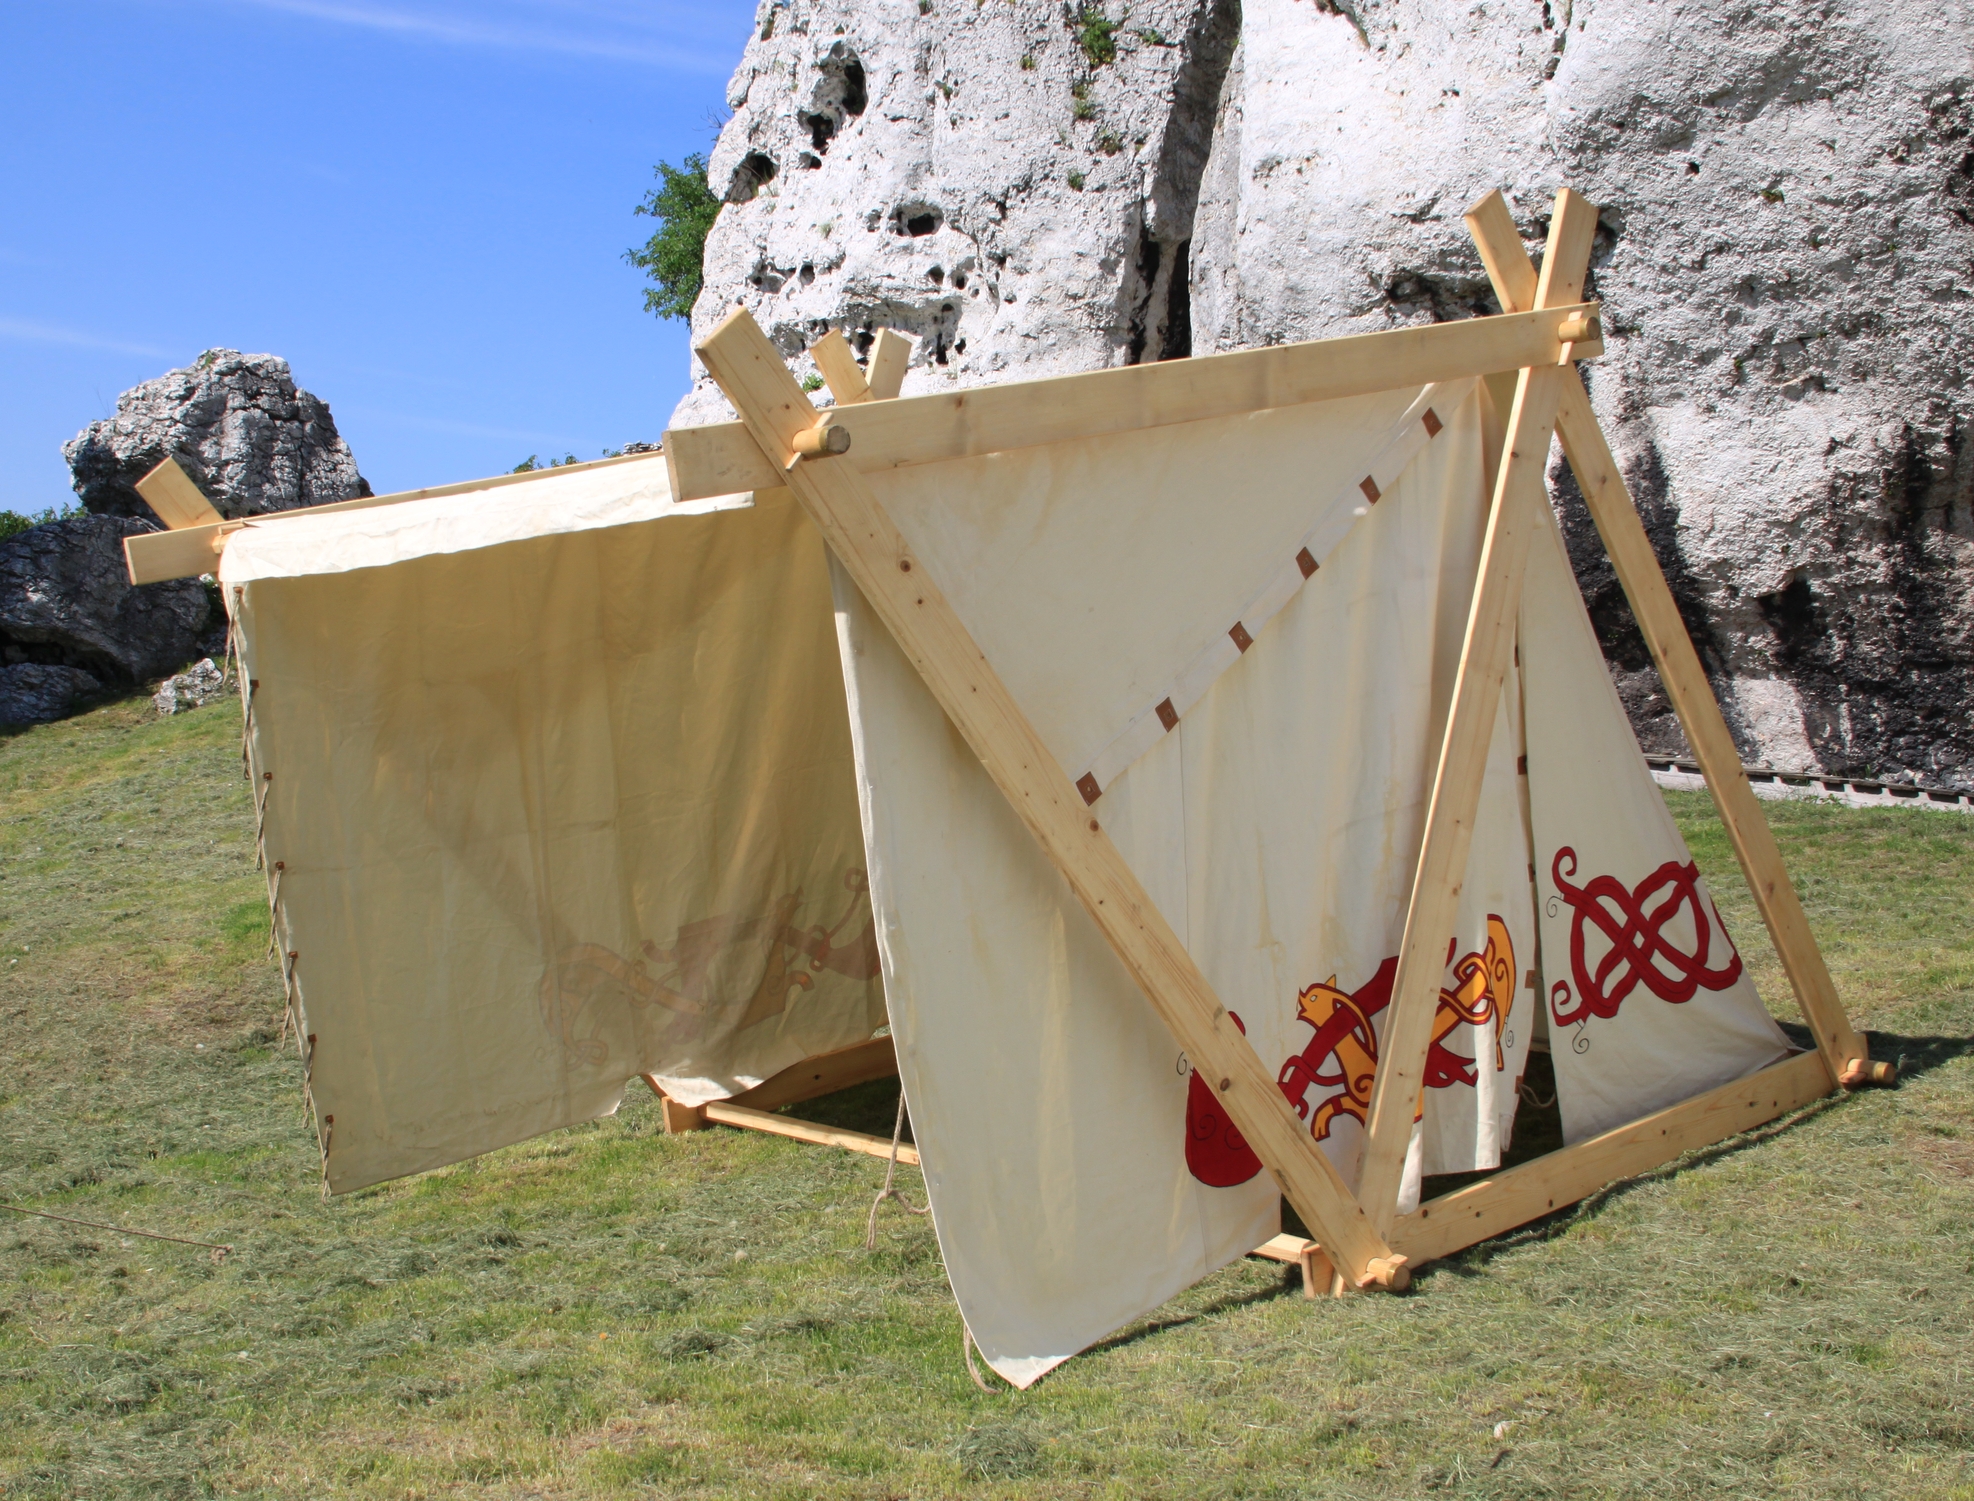 Marine Onbepaald Pas op Historical tents - Tentorium - Anglo-Saxon, Geteld, historical tent,  soldier tents, linen tents, medieval tents, cone tents, Market-tents,  Vikings tents, yurt tents, Glamping tents, Vikings A-frame tents, Roman  tents, yurt